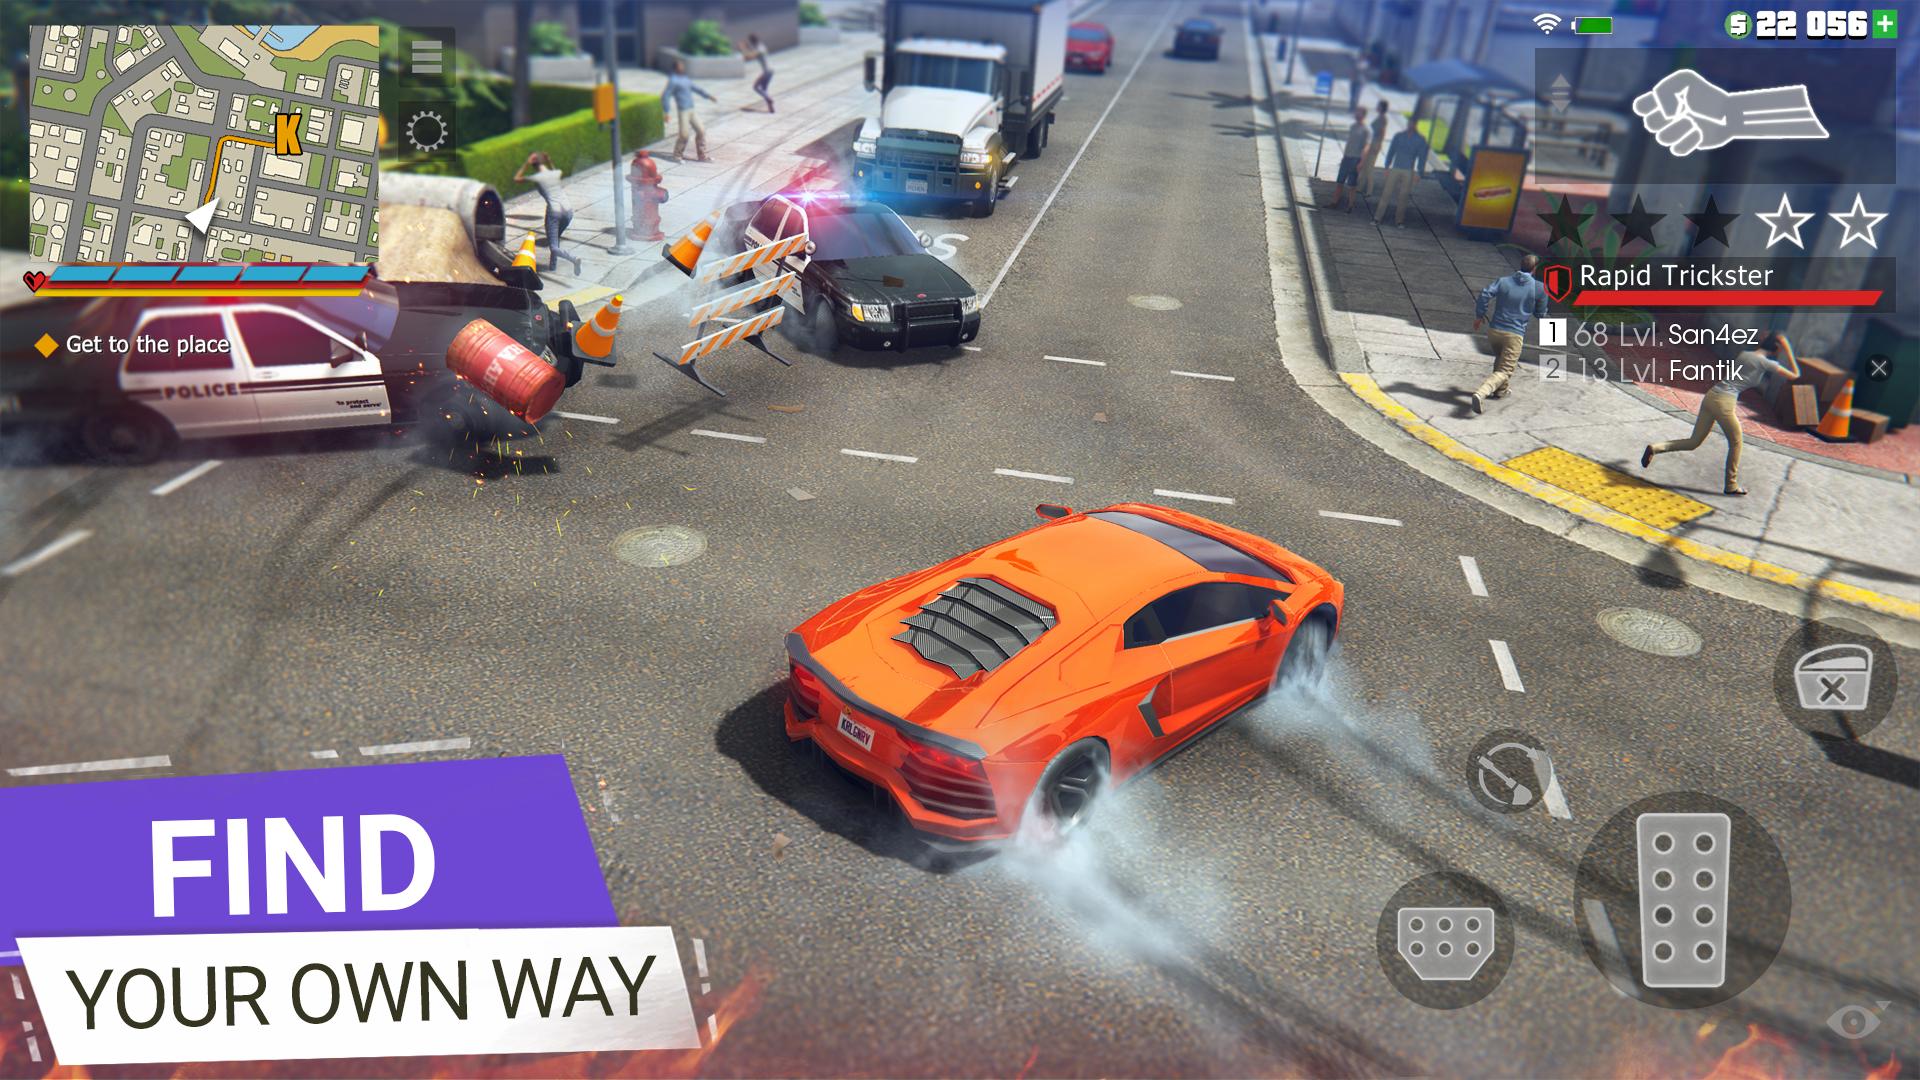 Play gta 5 in android фото 97